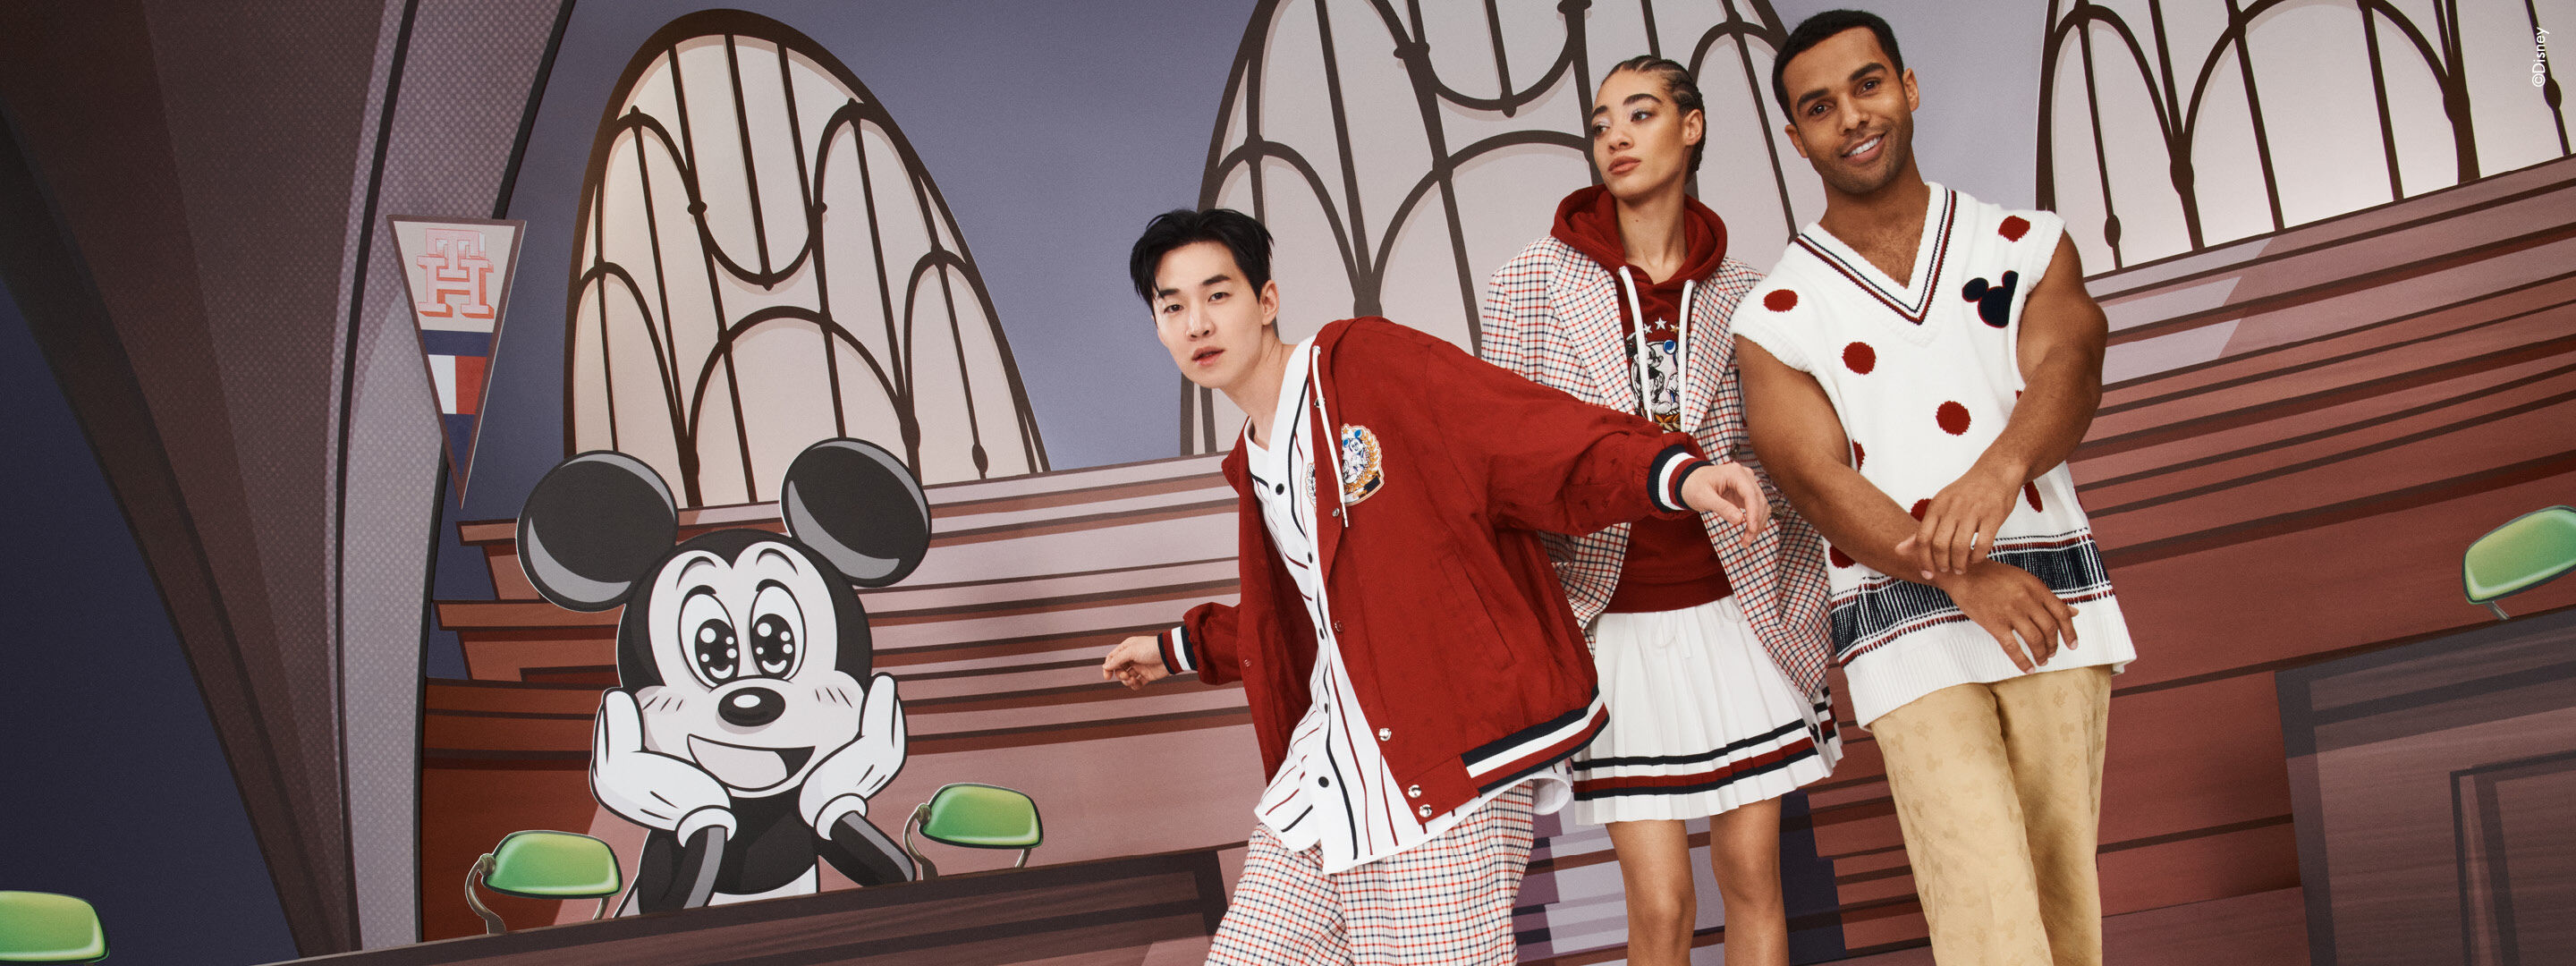 Tommy x Disney - JOIN THE ADVENTURE